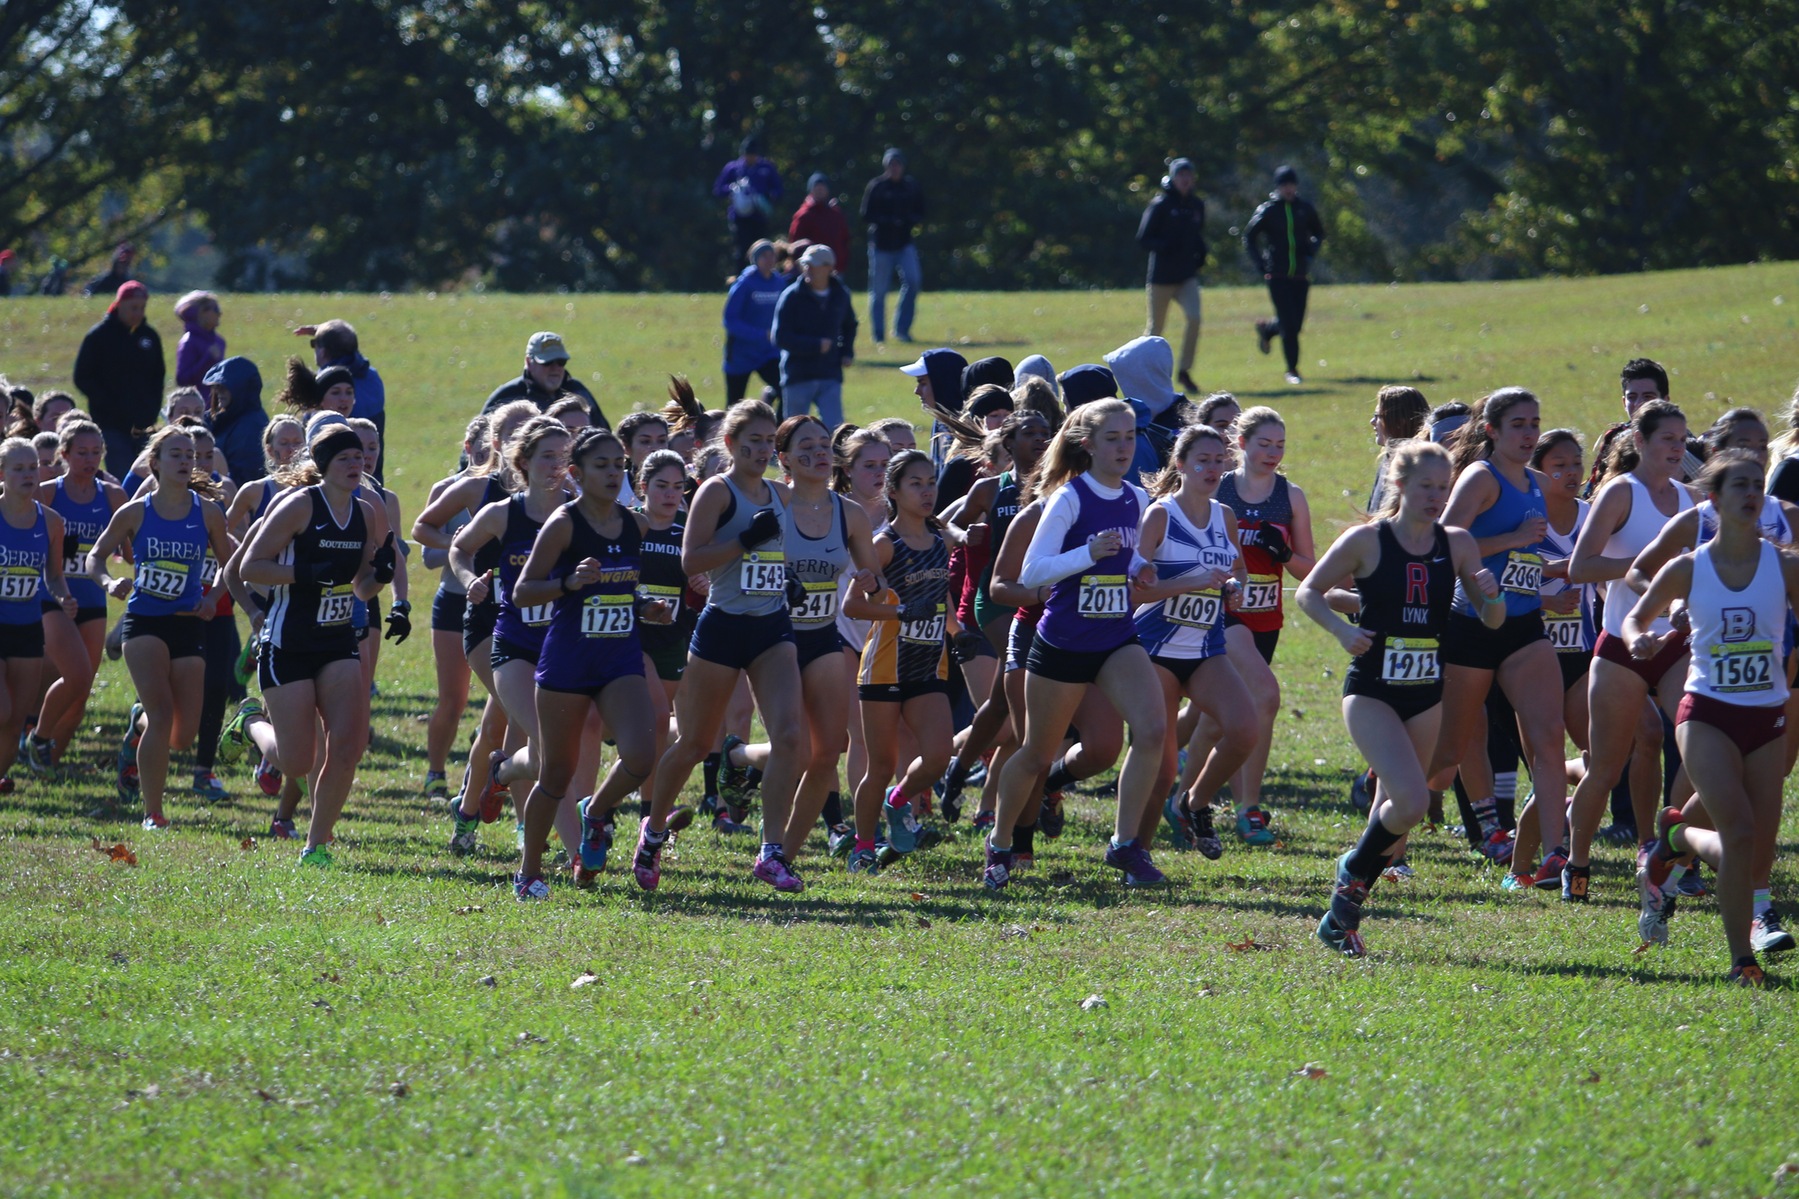 Women's Cross Country Competes In NCAA Regional Championship